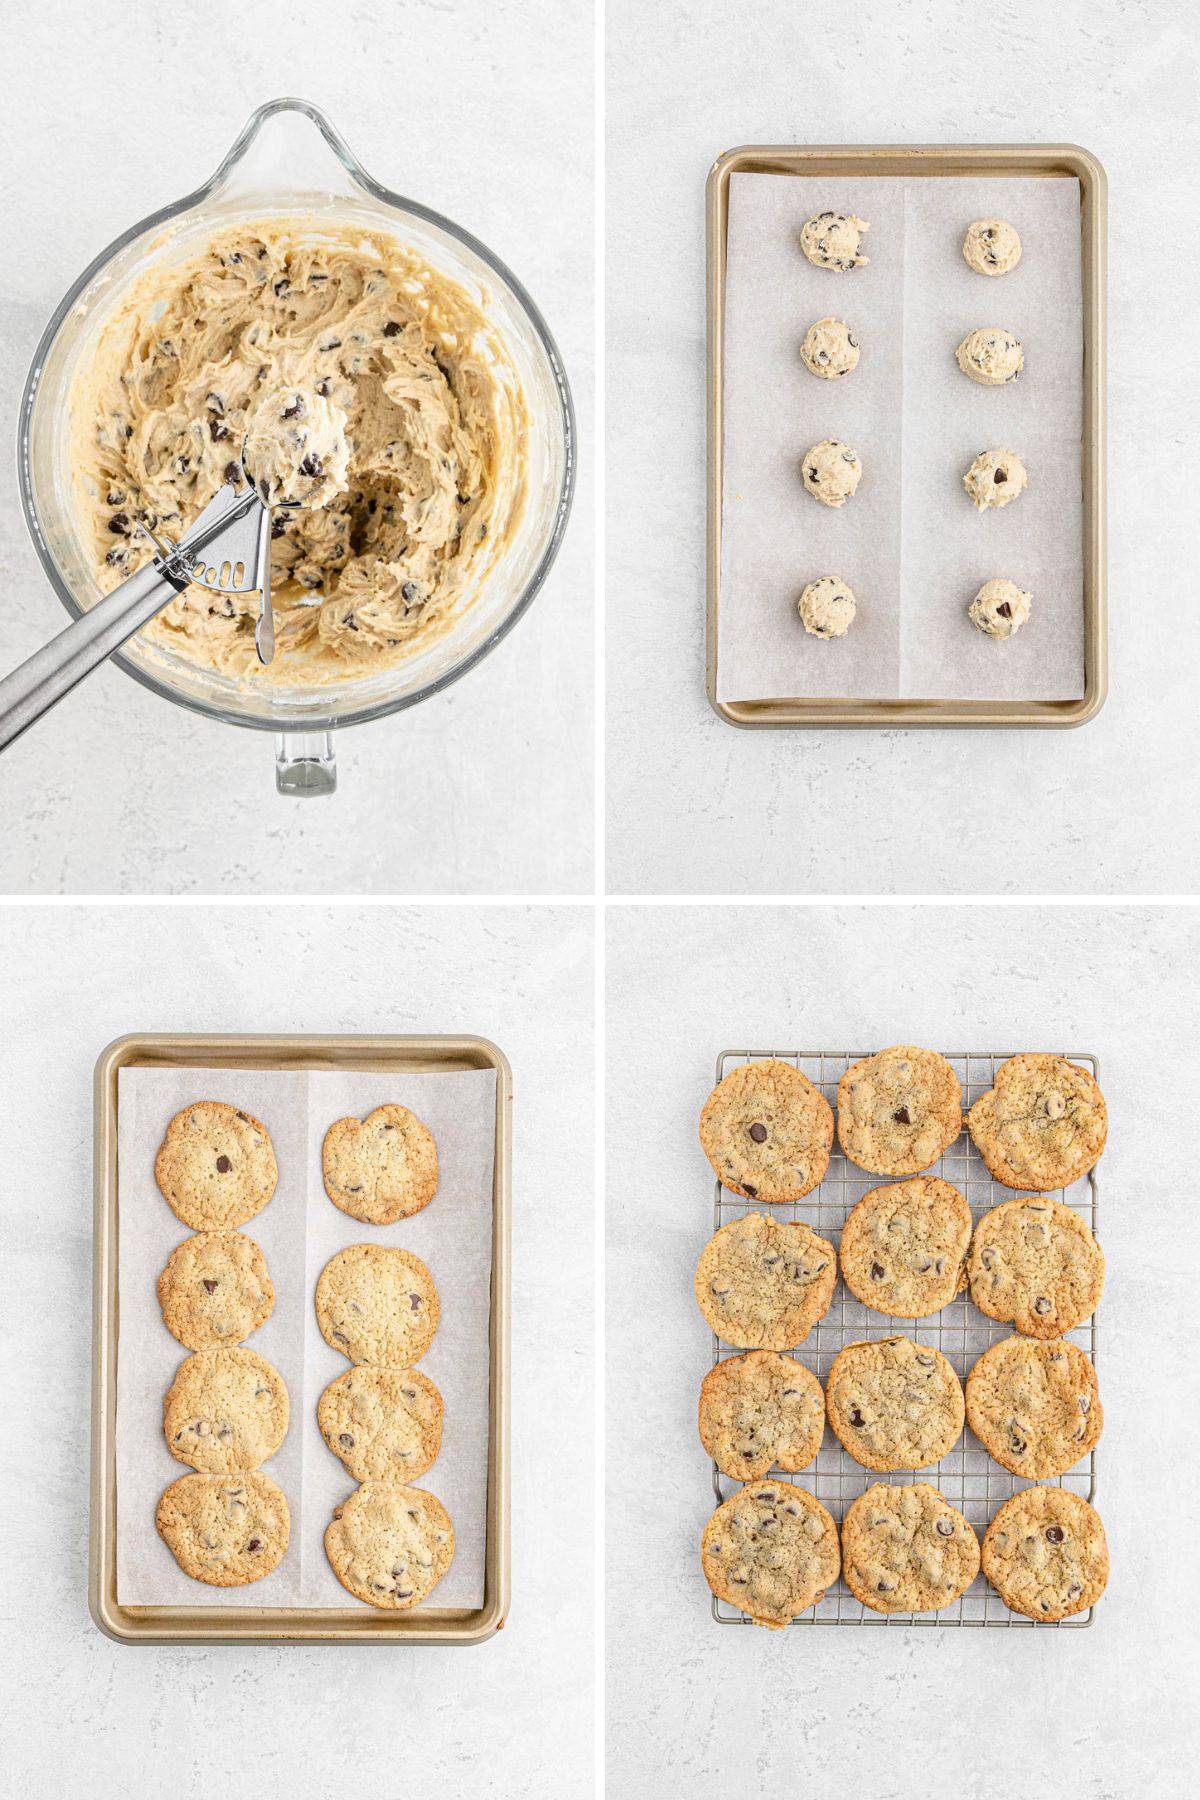 A collage showing the dough in a cookie scoop, on a baking tray before and after baking, and last cooling on a wire rack.